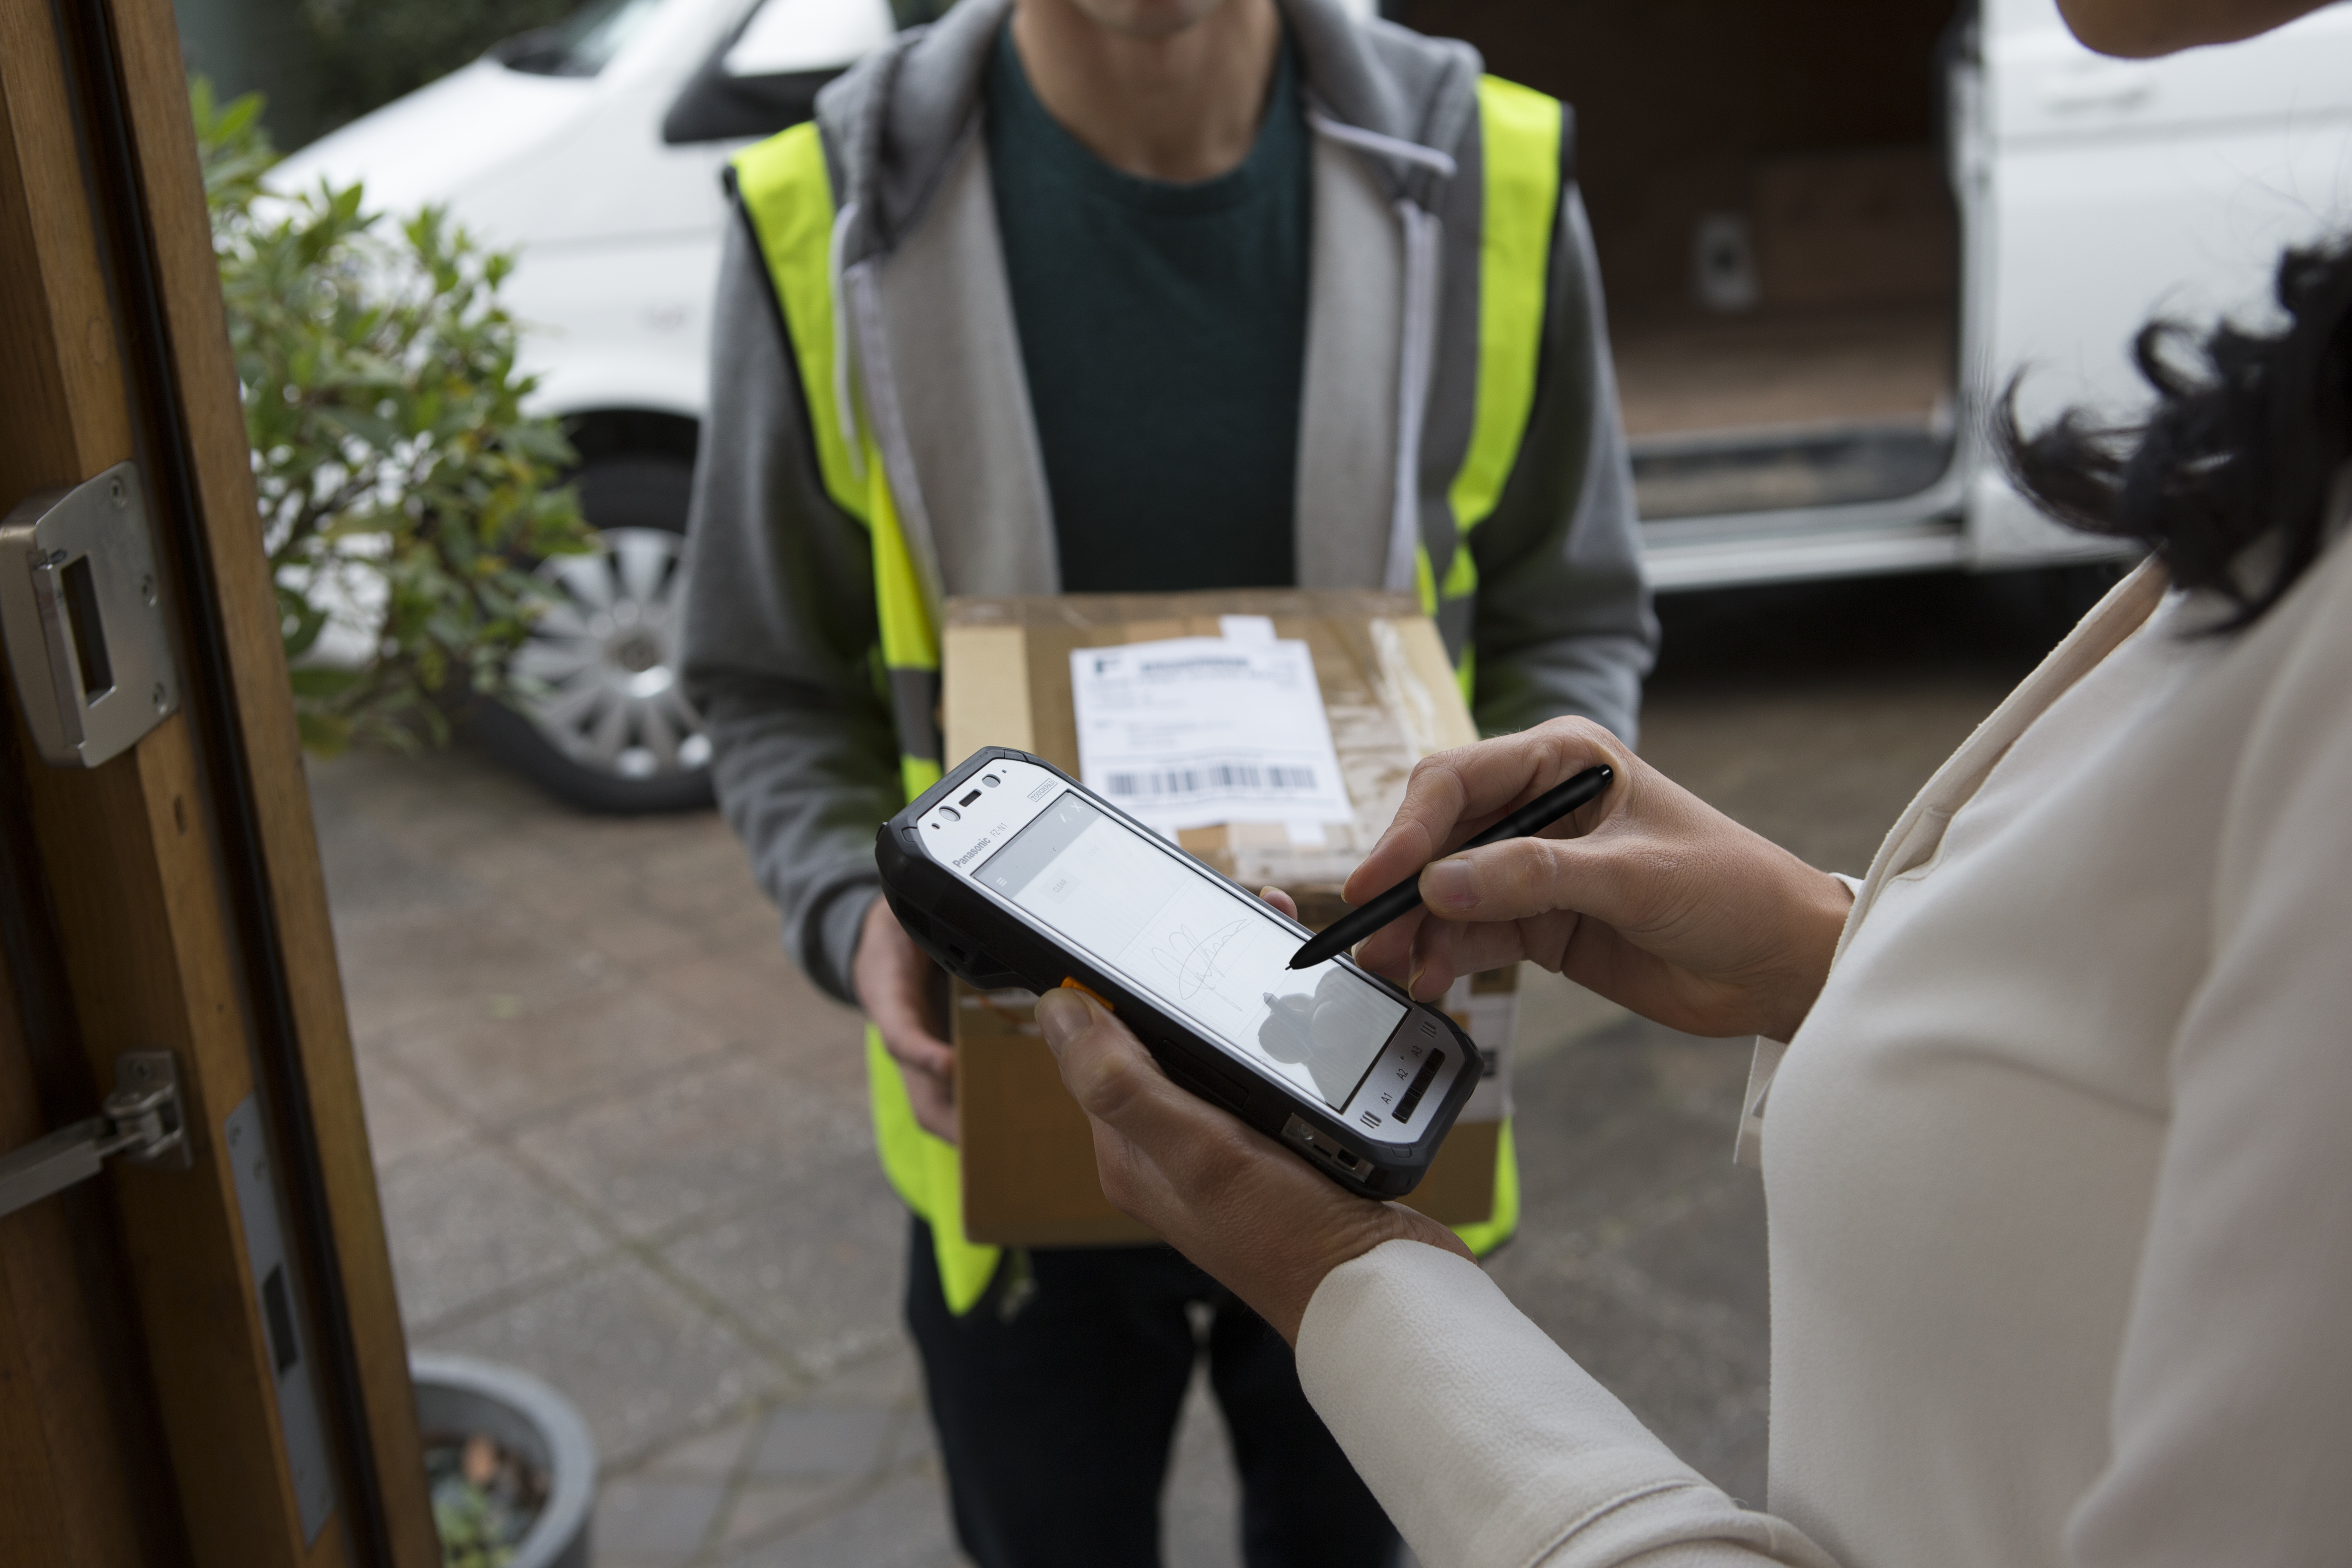 A messenger delivering a package using a handheld device that is managed and secured by SOTI's MDM solution